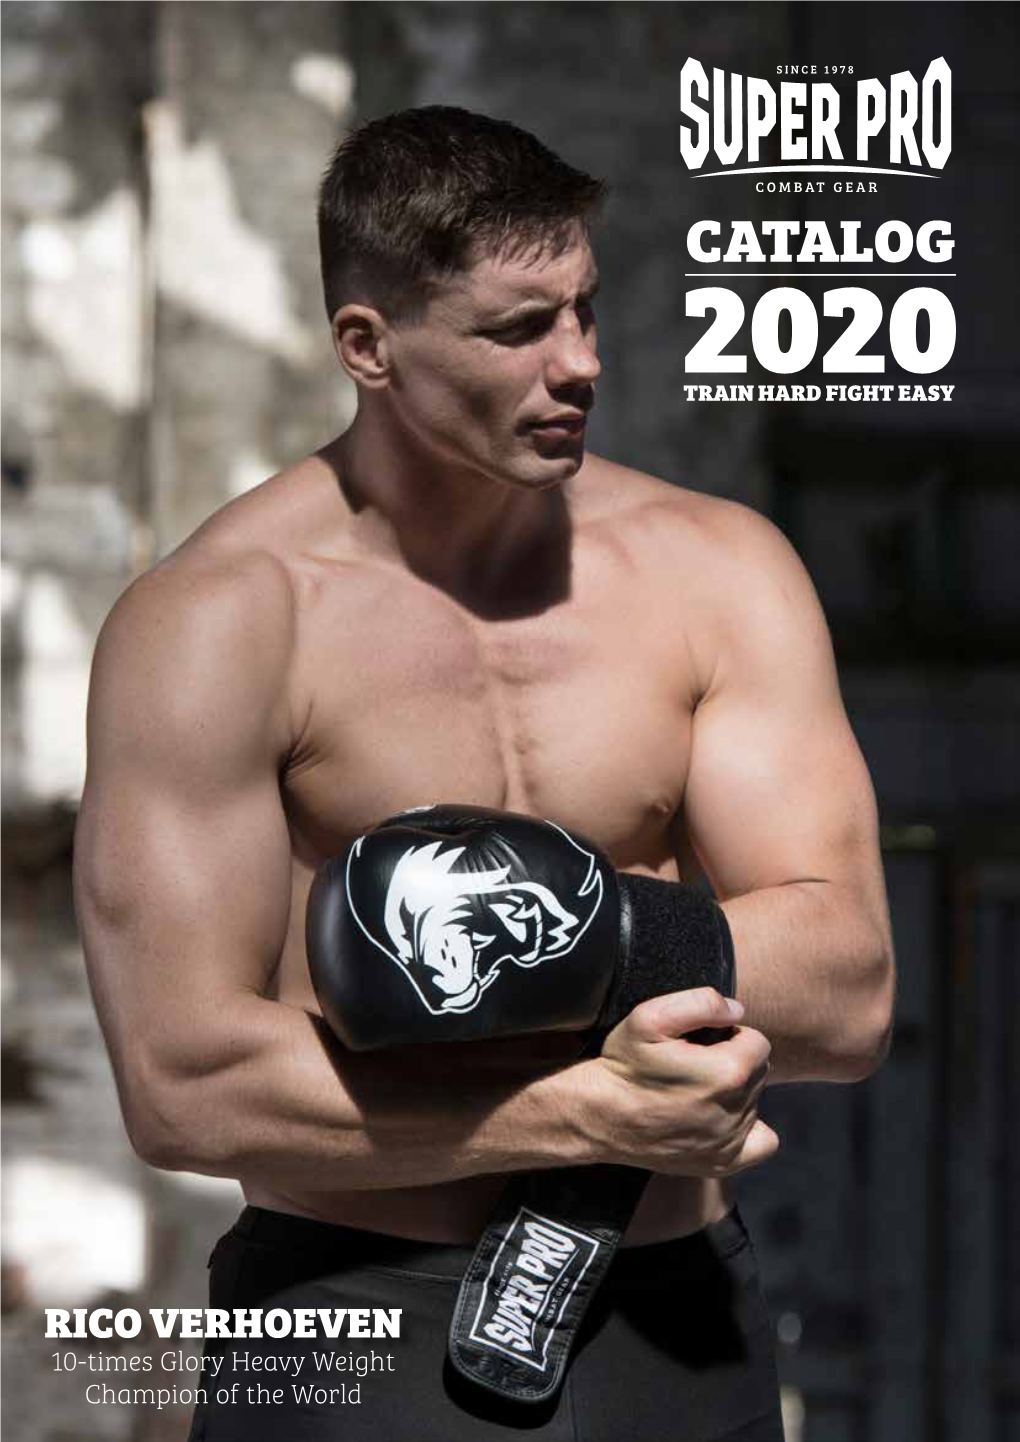 RICO VERHOEVEN 10-Times Glory Heavy Weight Champion of the World